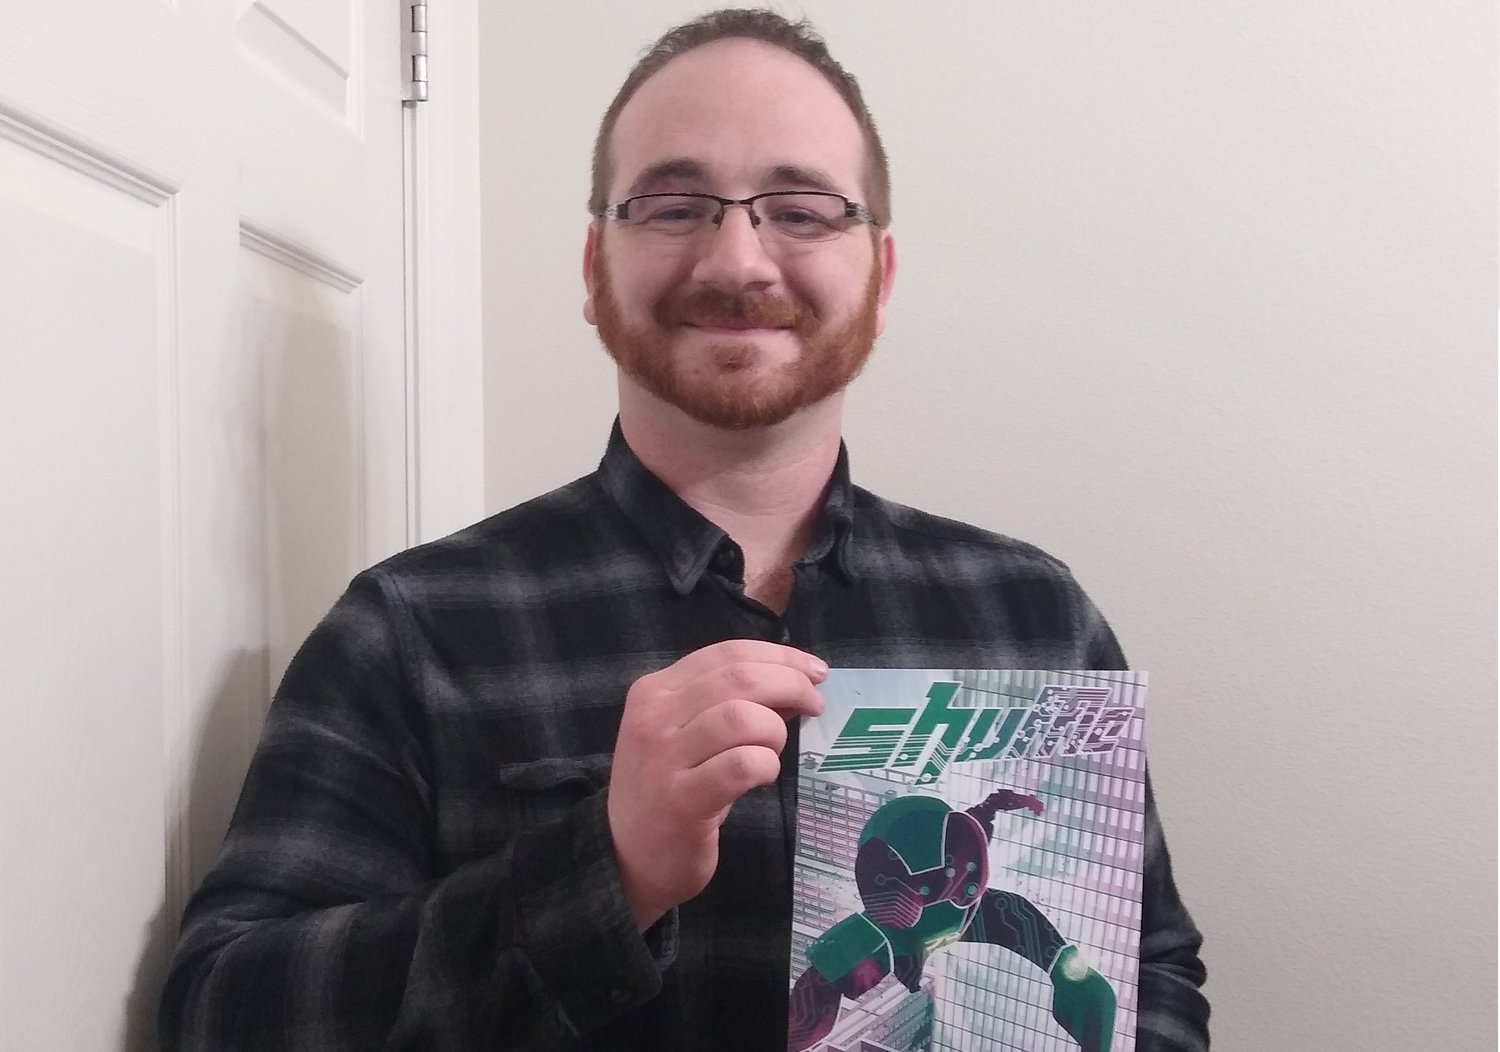 JD Boucher holds a poster of his new comic, Shuffle.